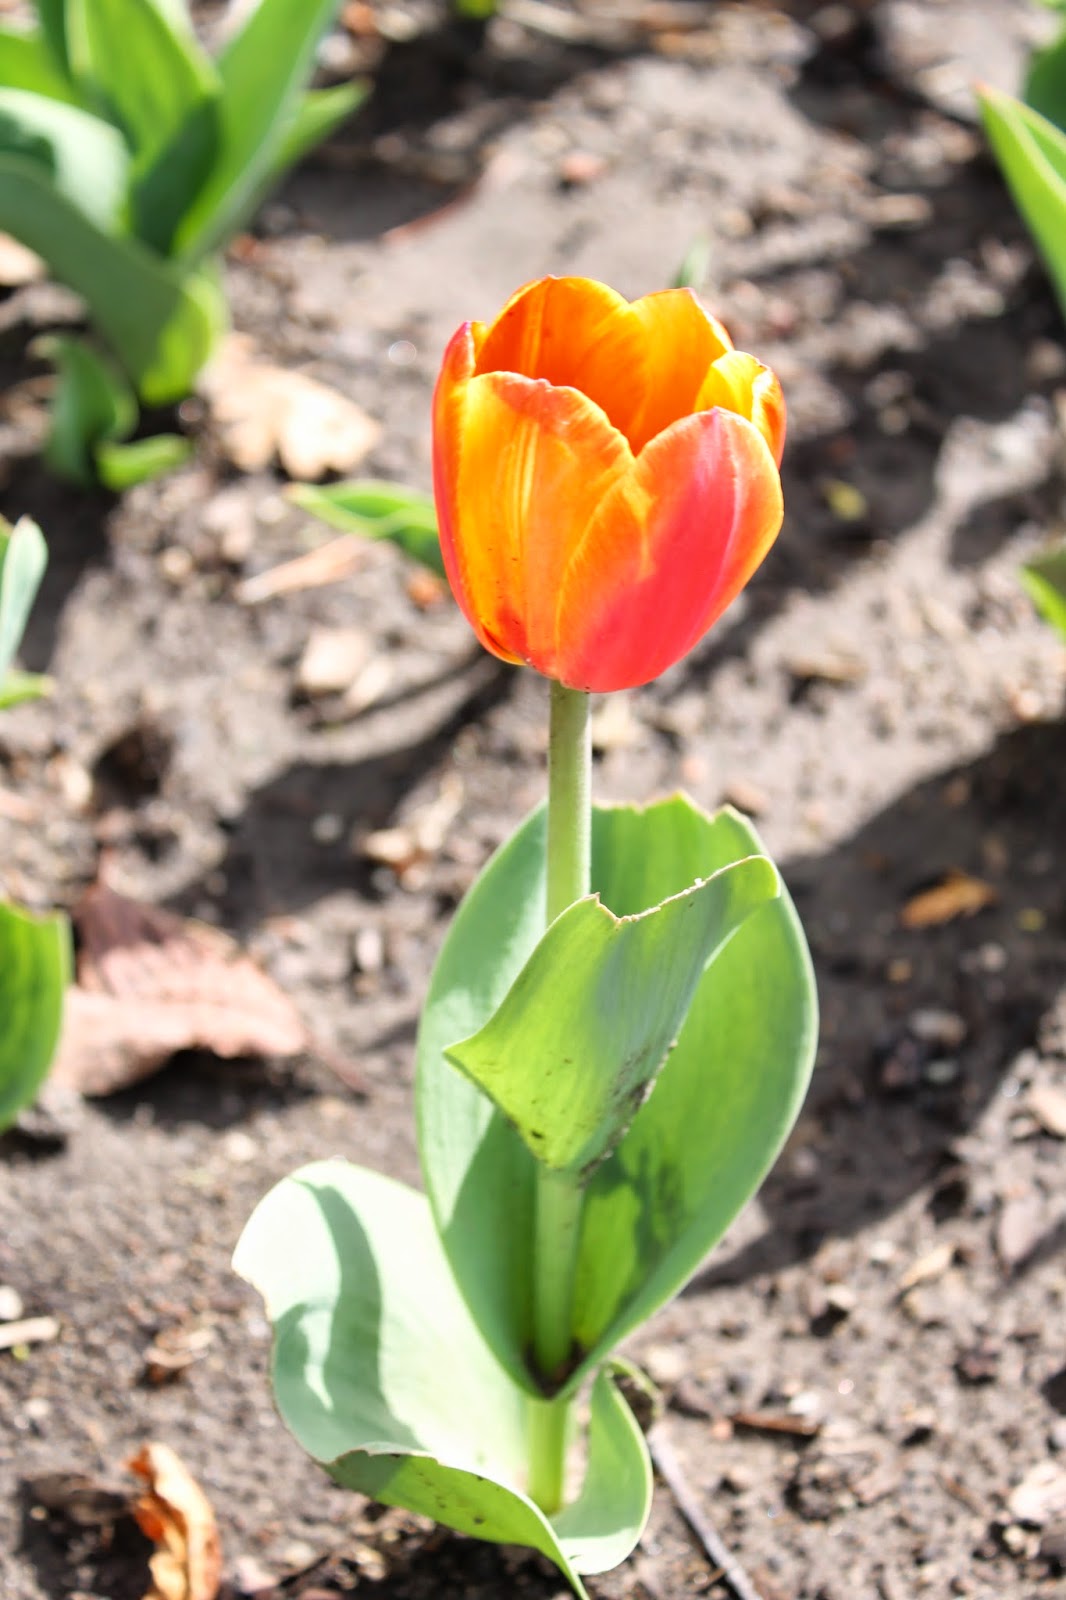 Corn, Beans, Pigs and Kids: Tulip in Bloom